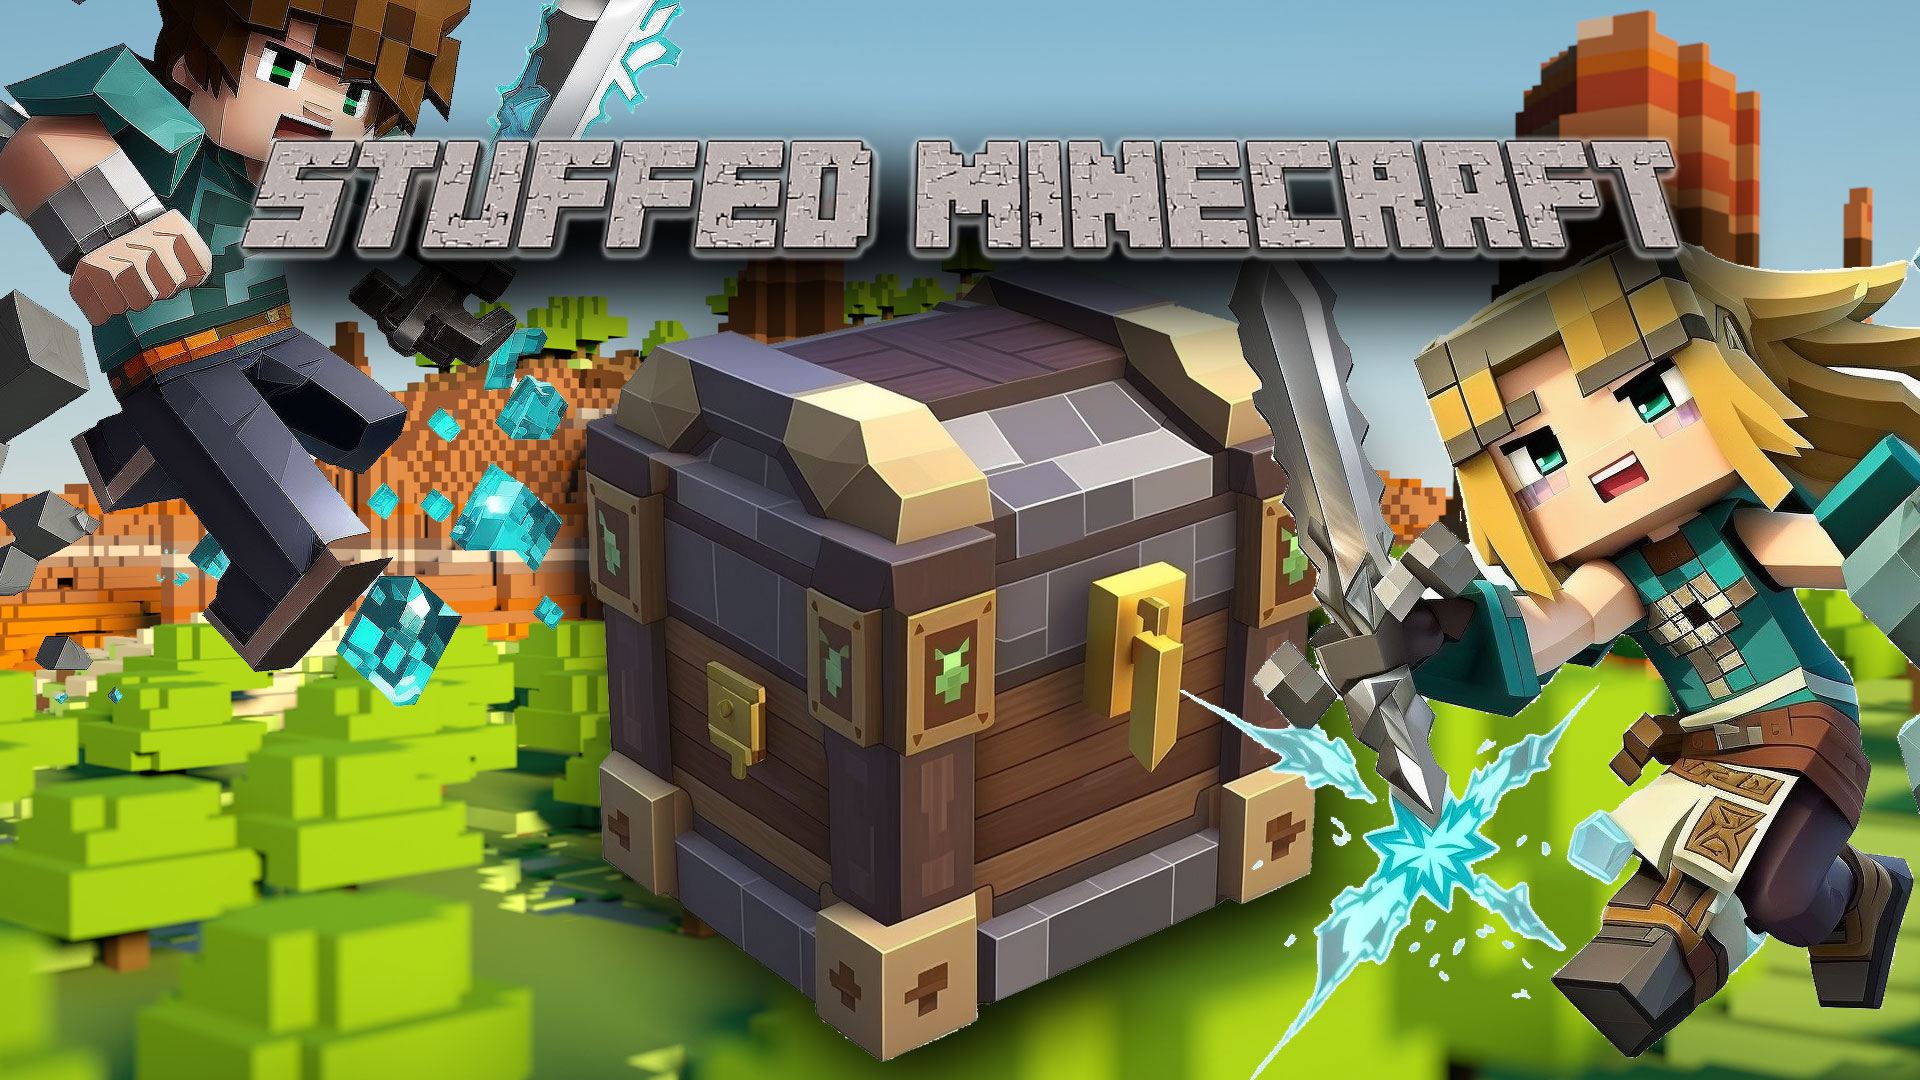 C-Puff's Stuff — Update on the Minecraft Malware from Curseforge.